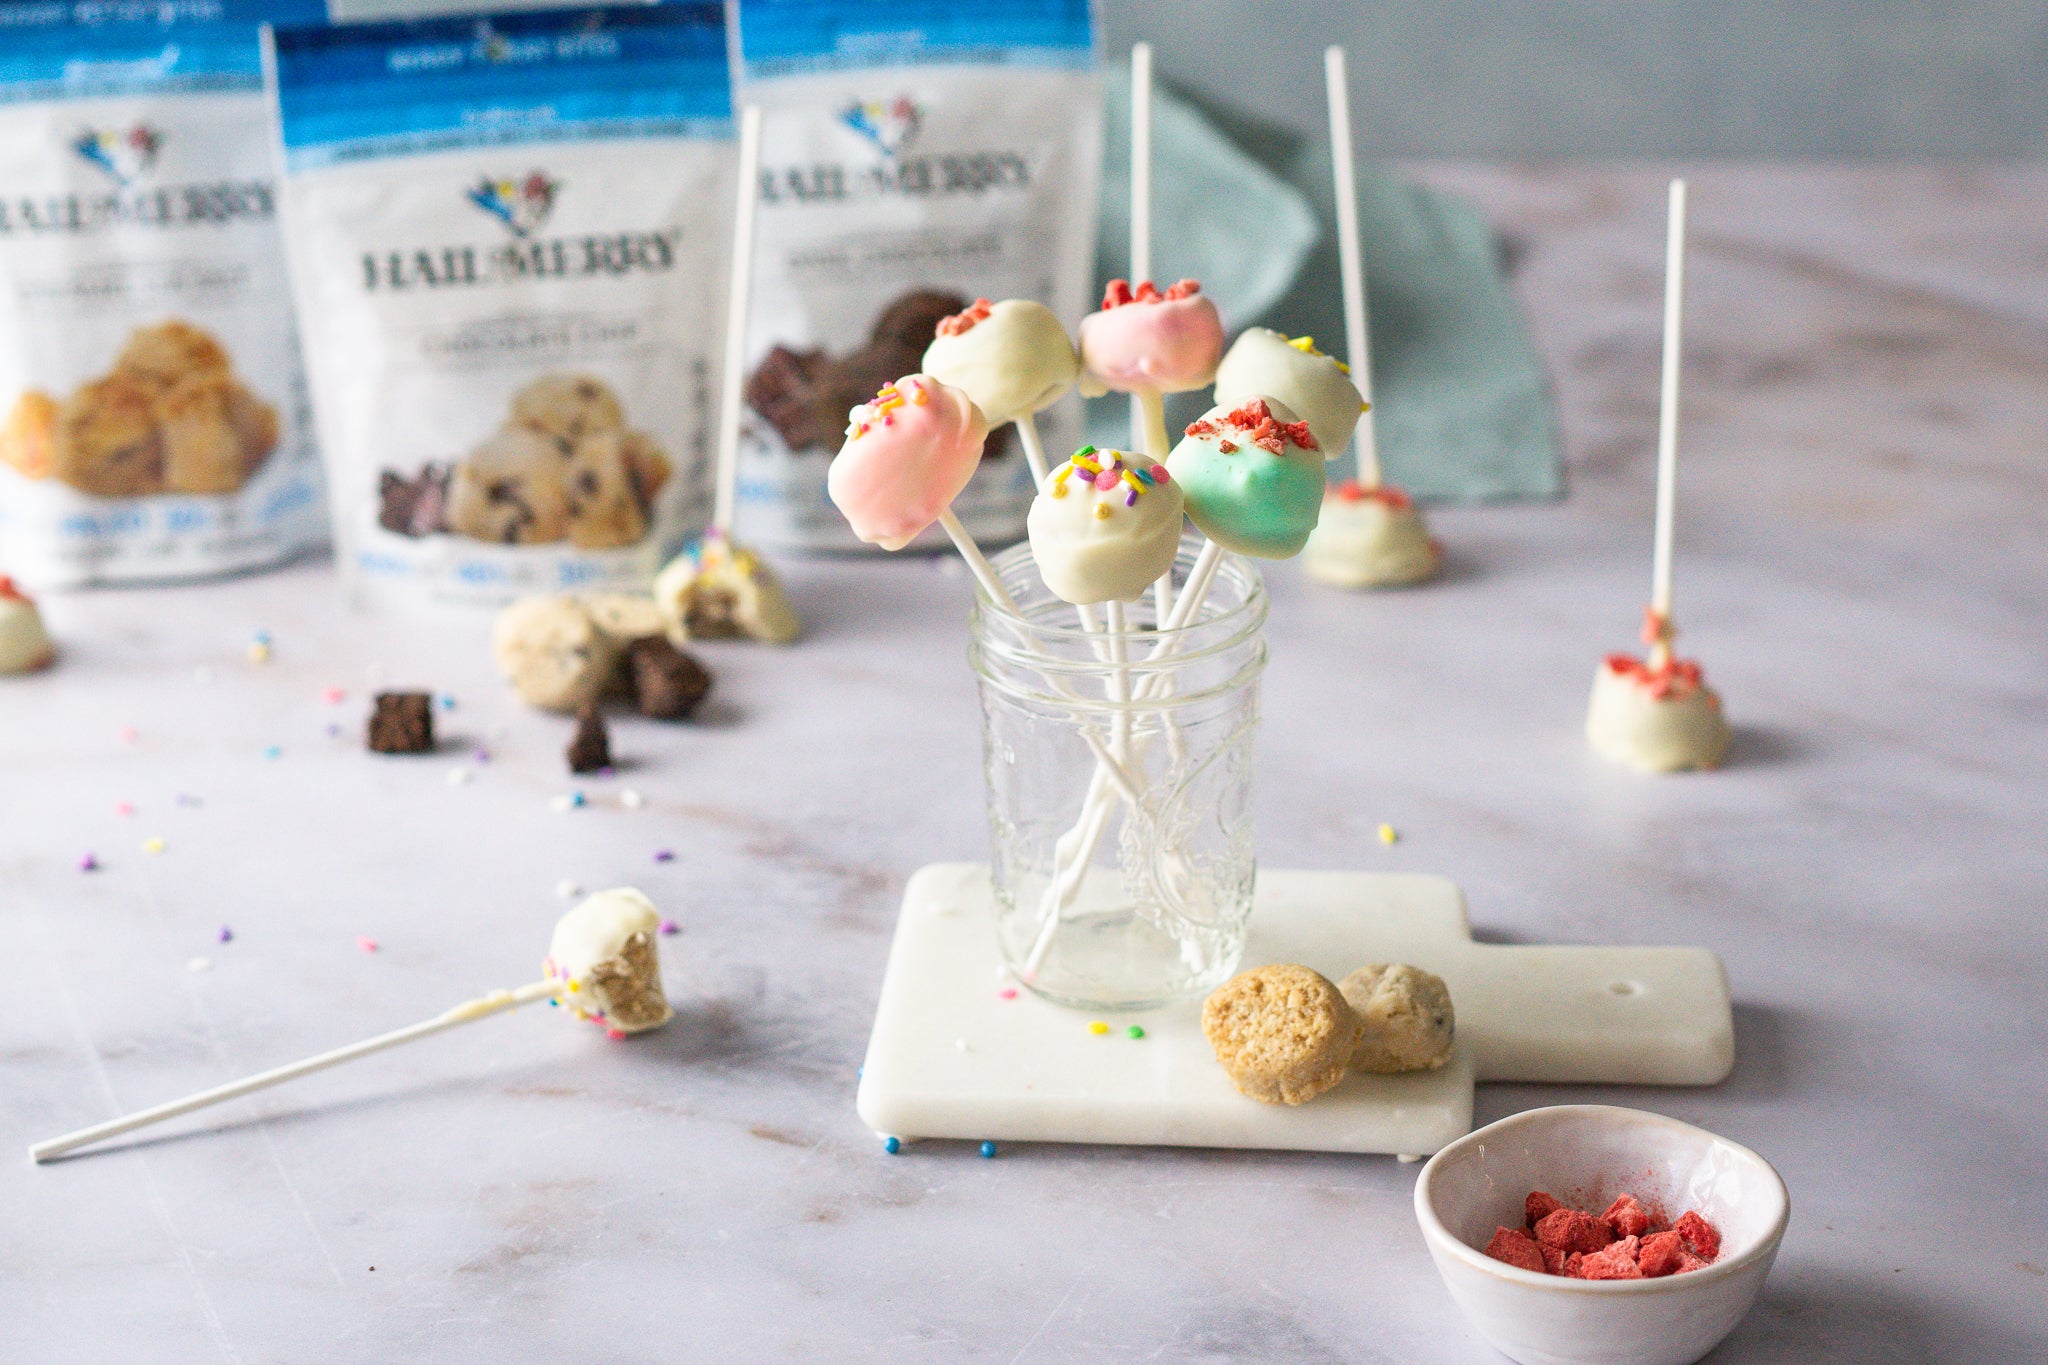 Coconut cookie dough pops made with plant-based cookie dough dipped in vegan white chocolate.  Topped with natural colored sprinkles and freeze-dried strawberries.